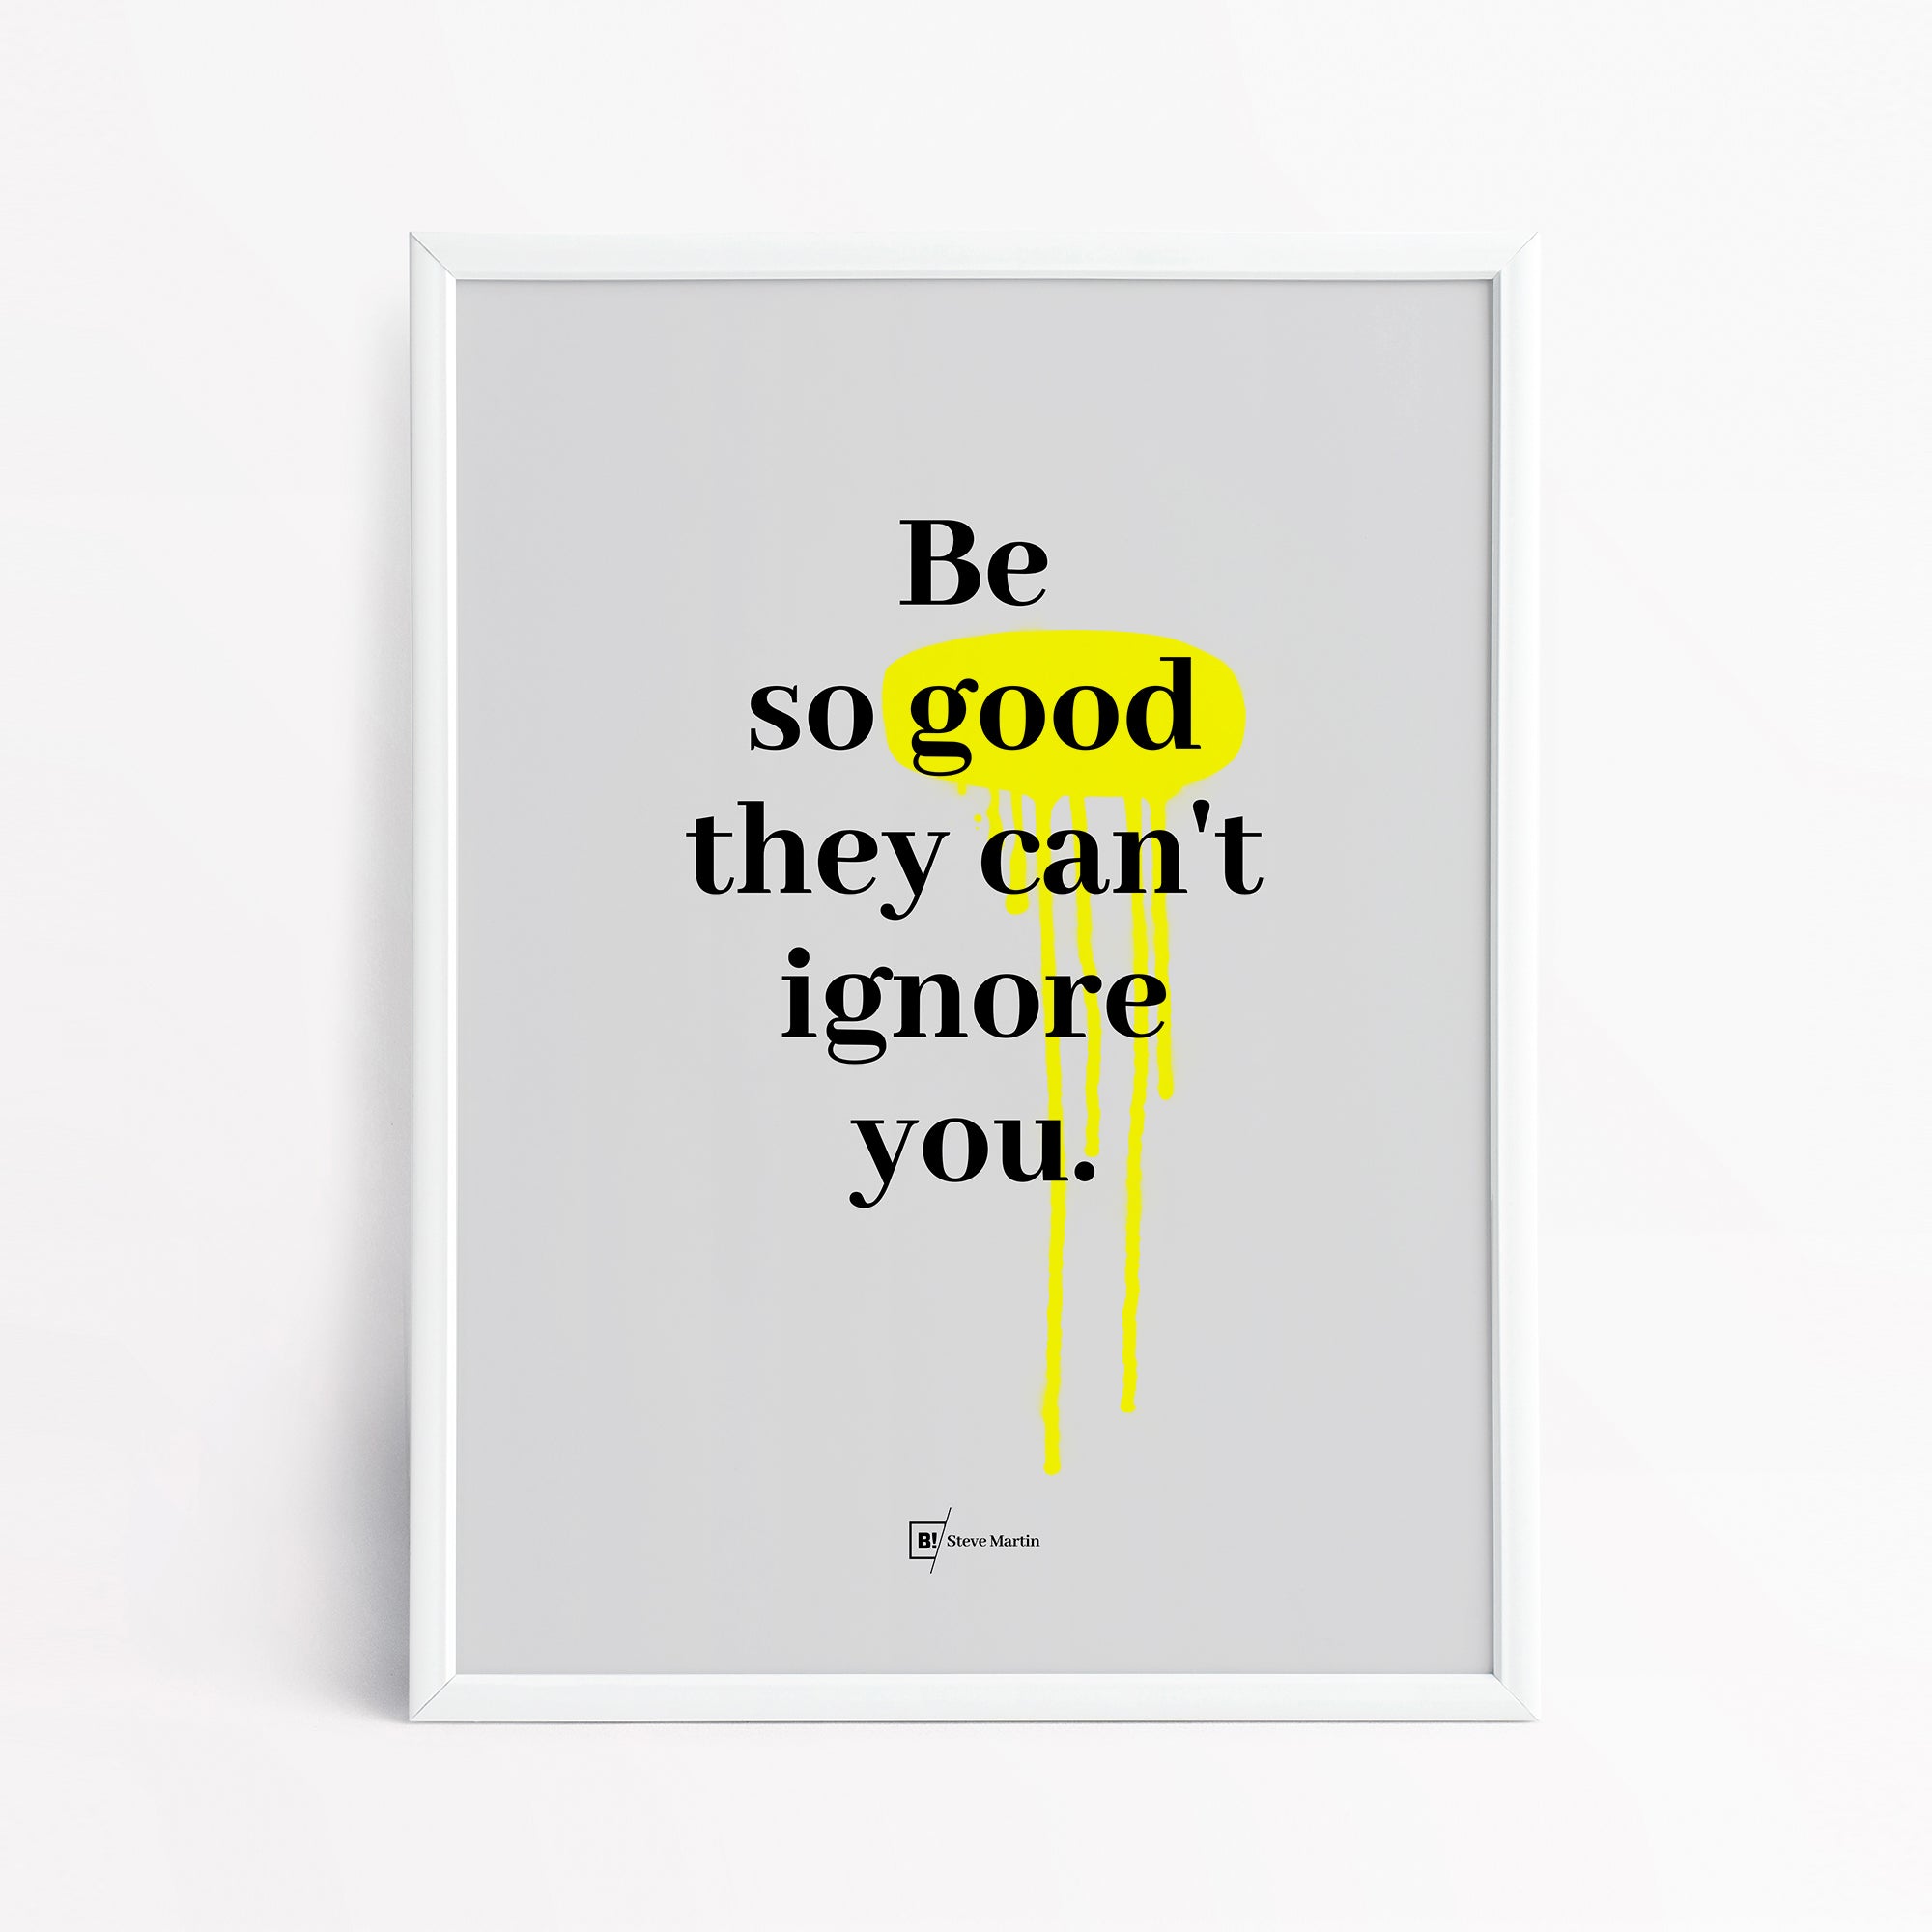 Be inspired by Steve Martin's famous "Be so good they can't ignore you" quote art print. This artwork was printed using the giclée process on archival acid-free paper and is presented in a simple white frame that captures its timeless beauty in every detail.